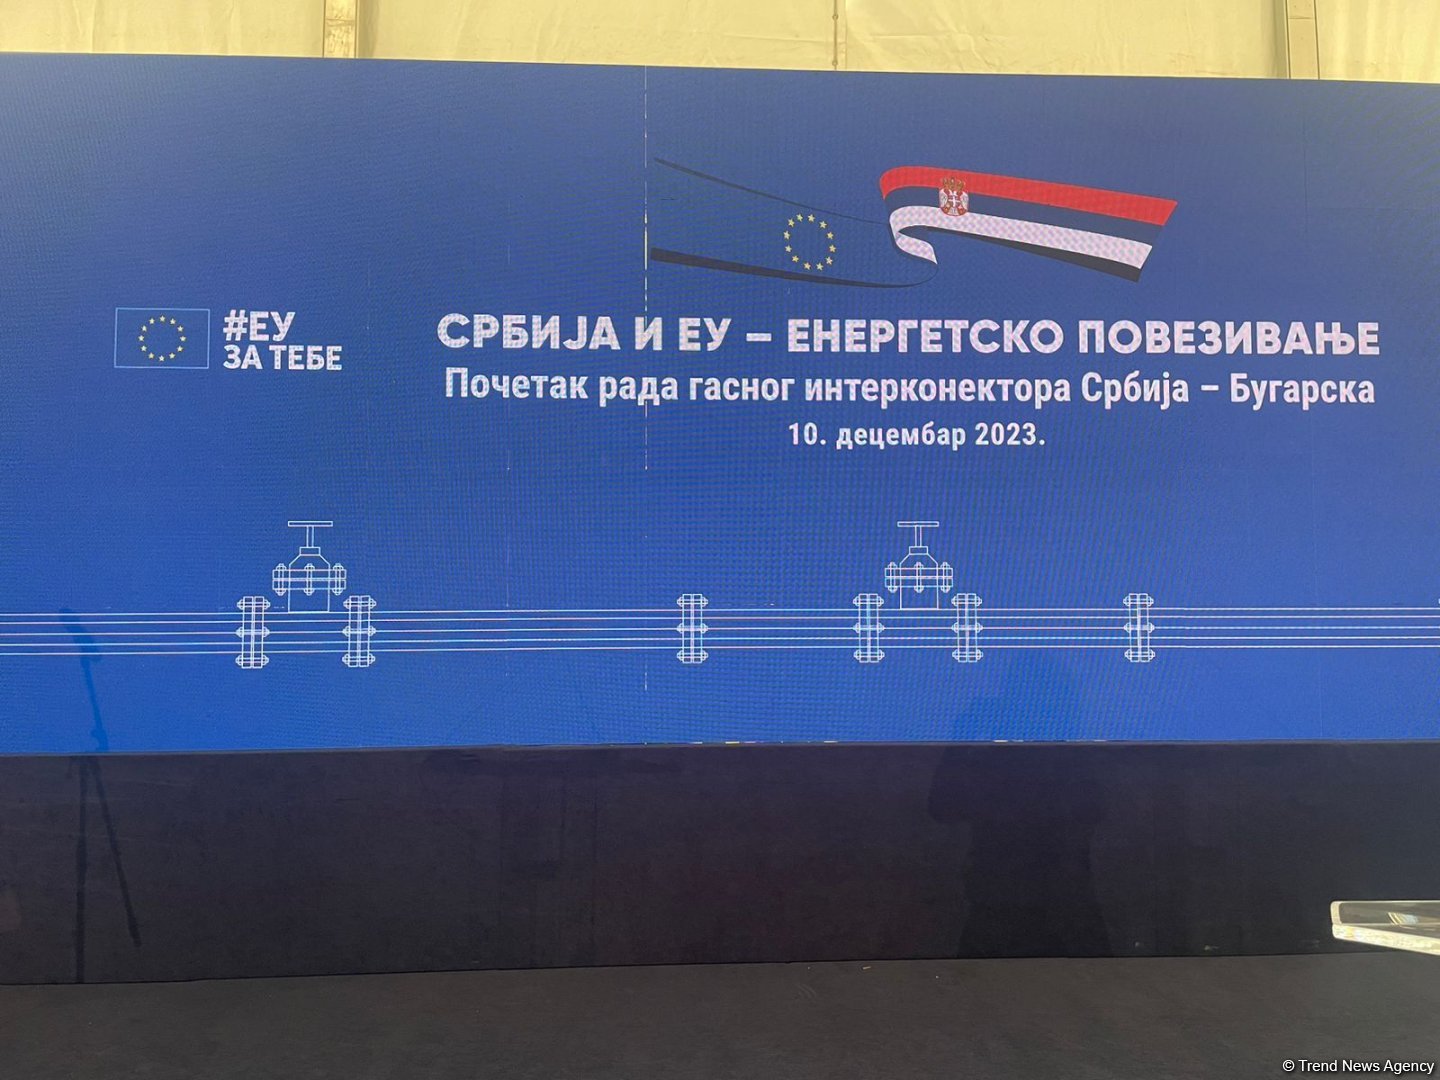 Serbia-Bulgaria Gas Interconnector launch ceremony takes place (PHOTO COVERAGE)